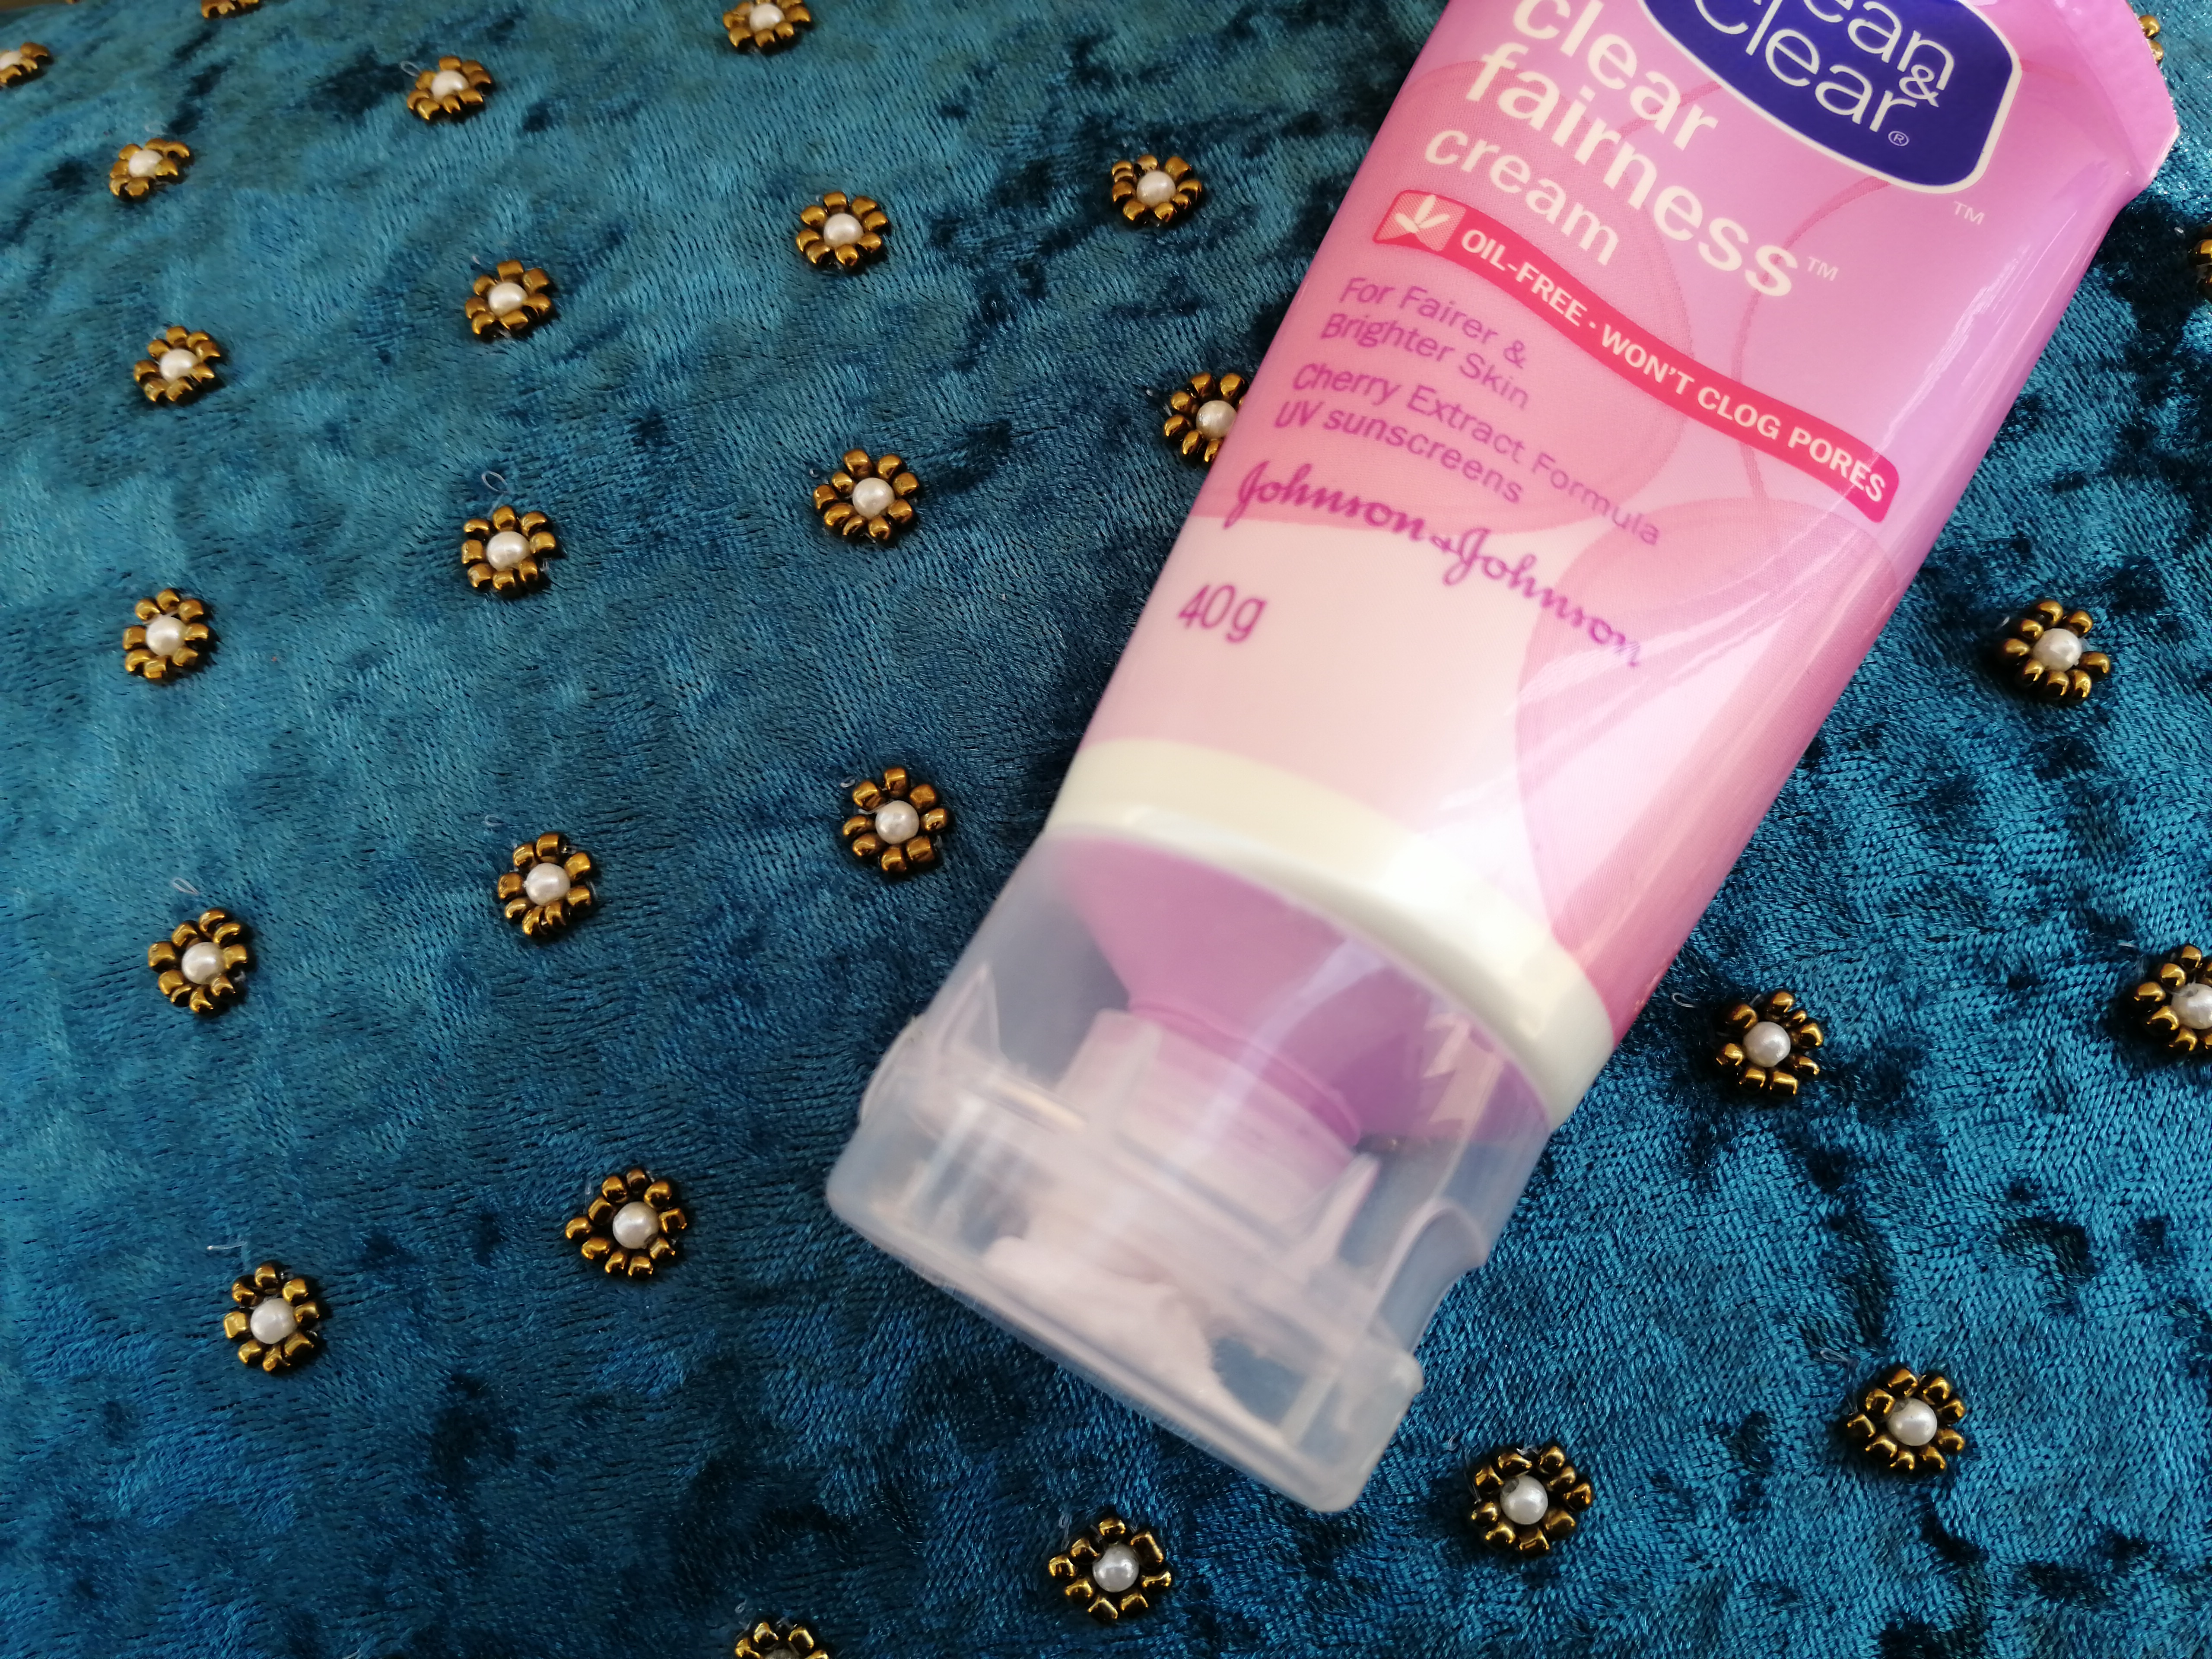 Clean and Clear Fairness Cream| Review